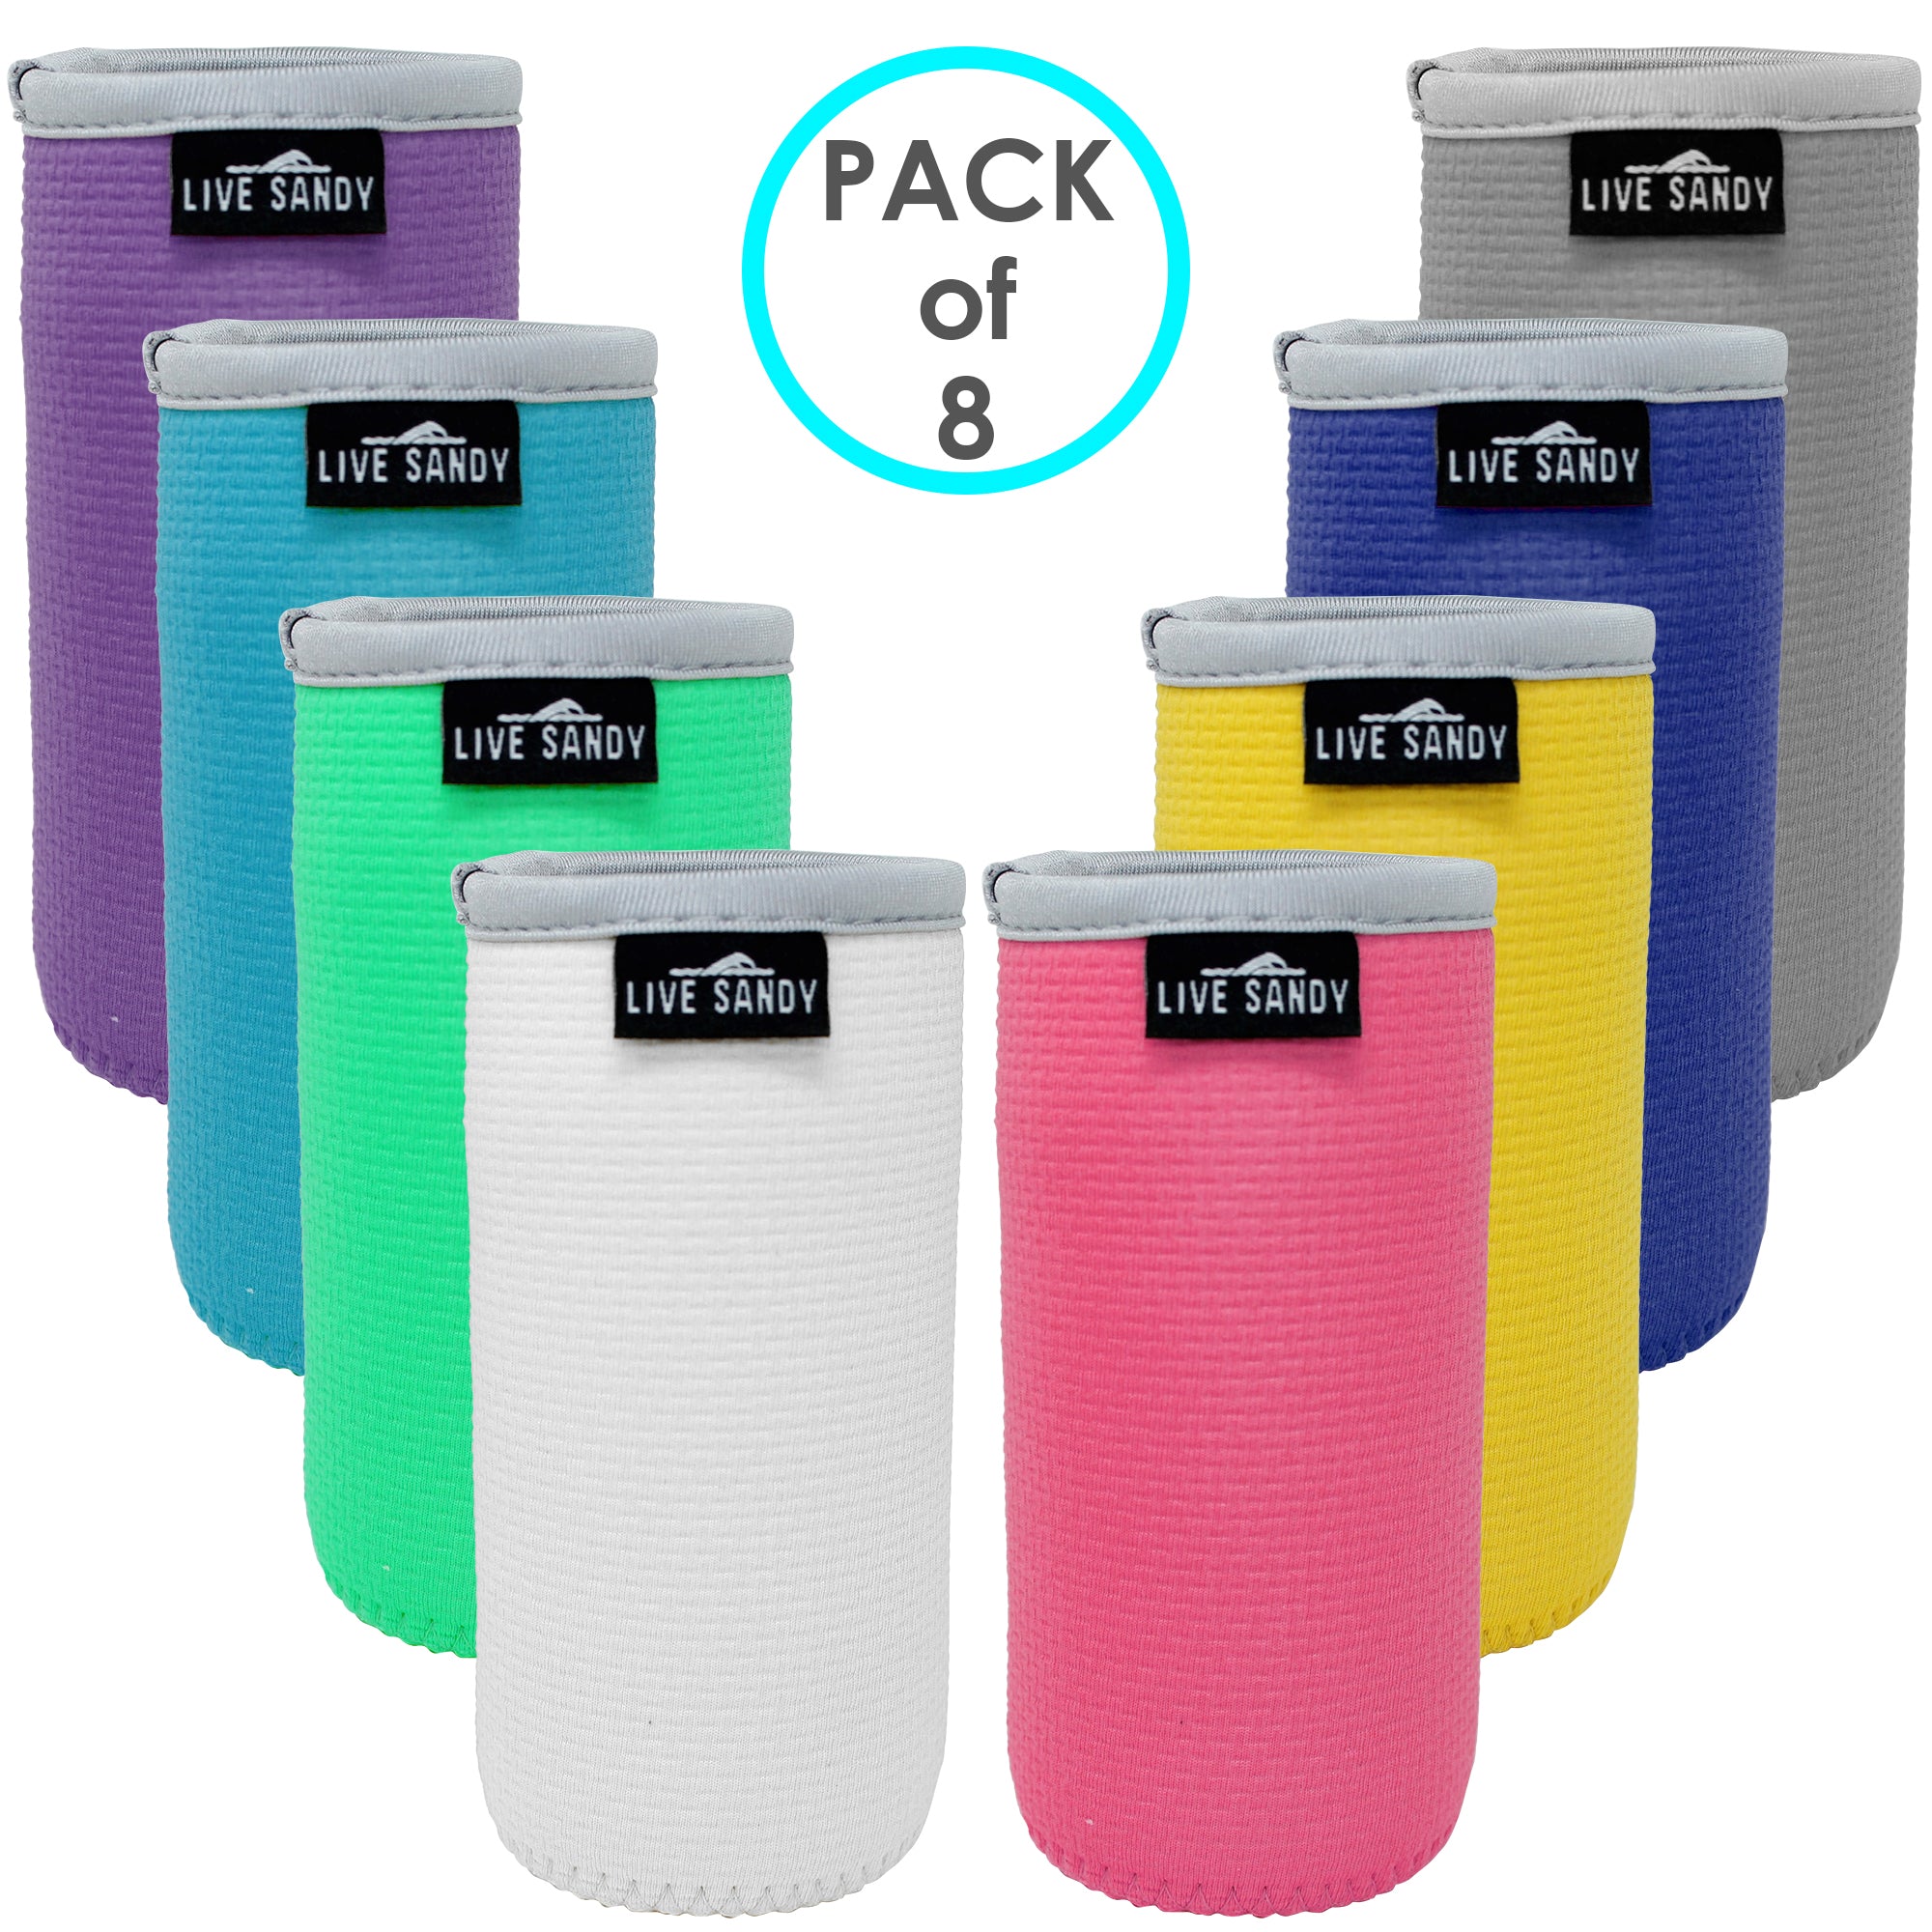 4pack] Slim Can Coozie, Cooler Bags ,Flag White Claw Can Cooler